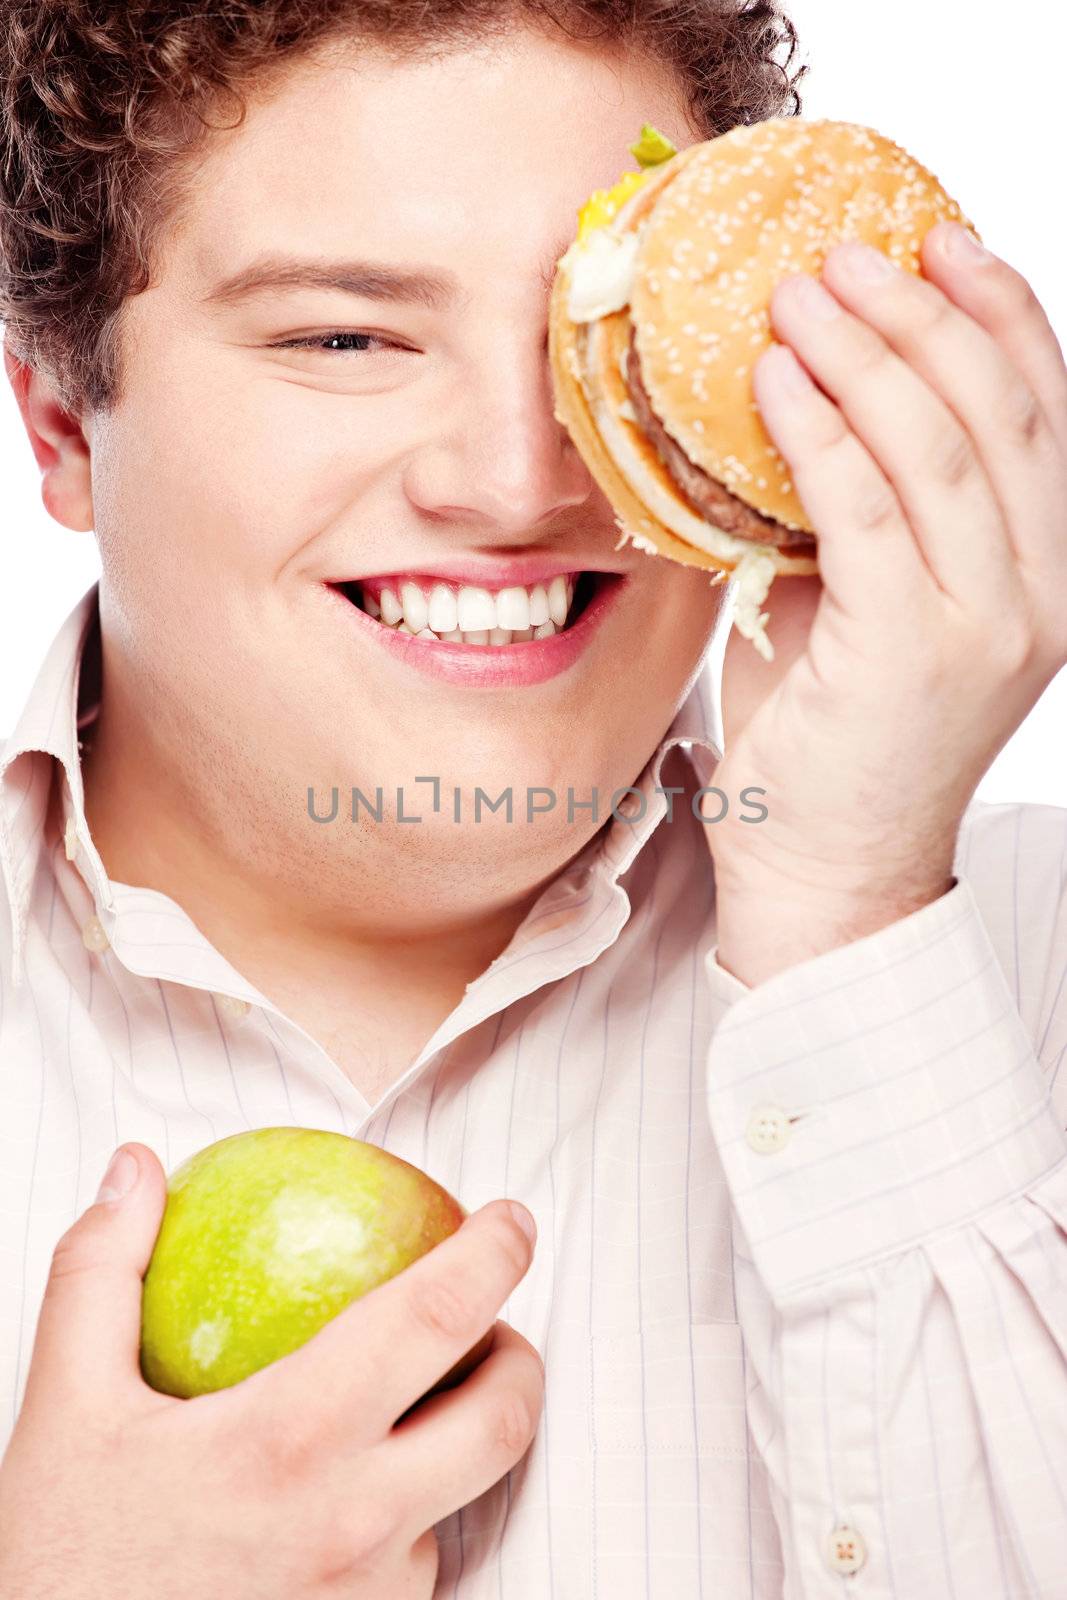 Young chubby man holding apple and hamburger by imarin